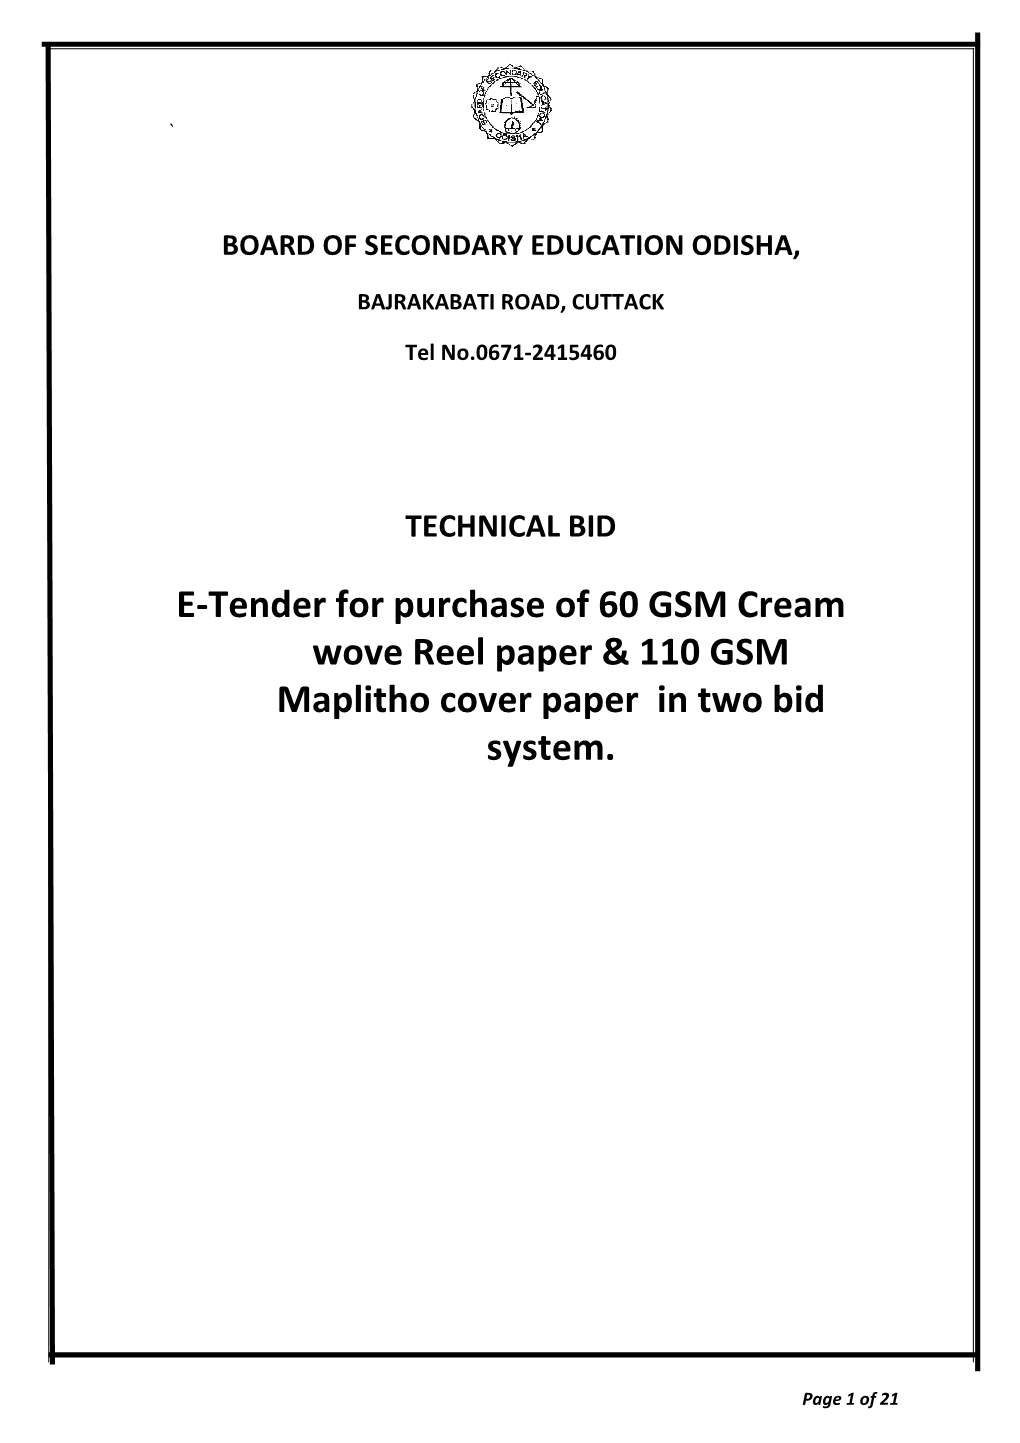 E-Tender for Purchase of 60 GSM Cream Wove Reel Paper & 110